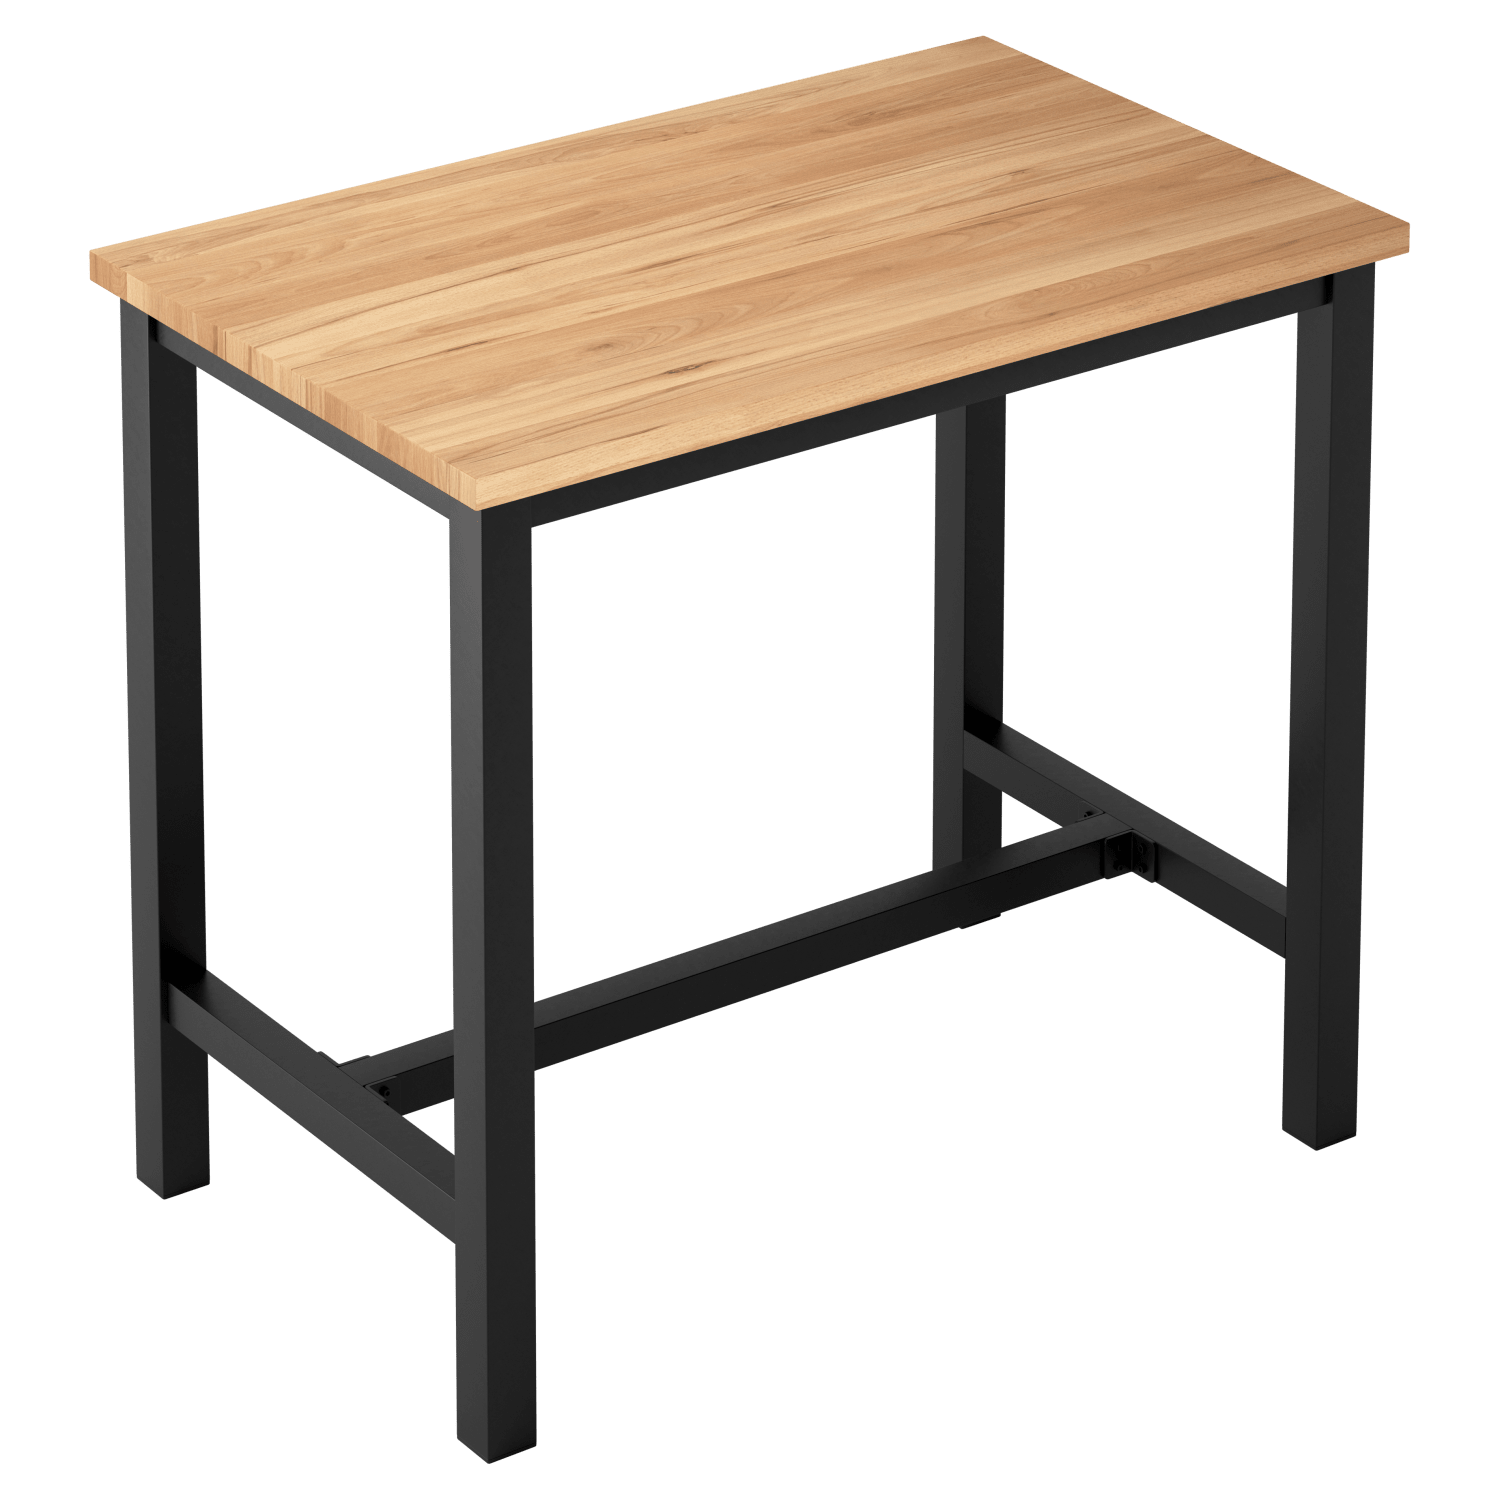 Cheap restaurant booth set table and chair furniture custom color black restaurant  booth seating morden